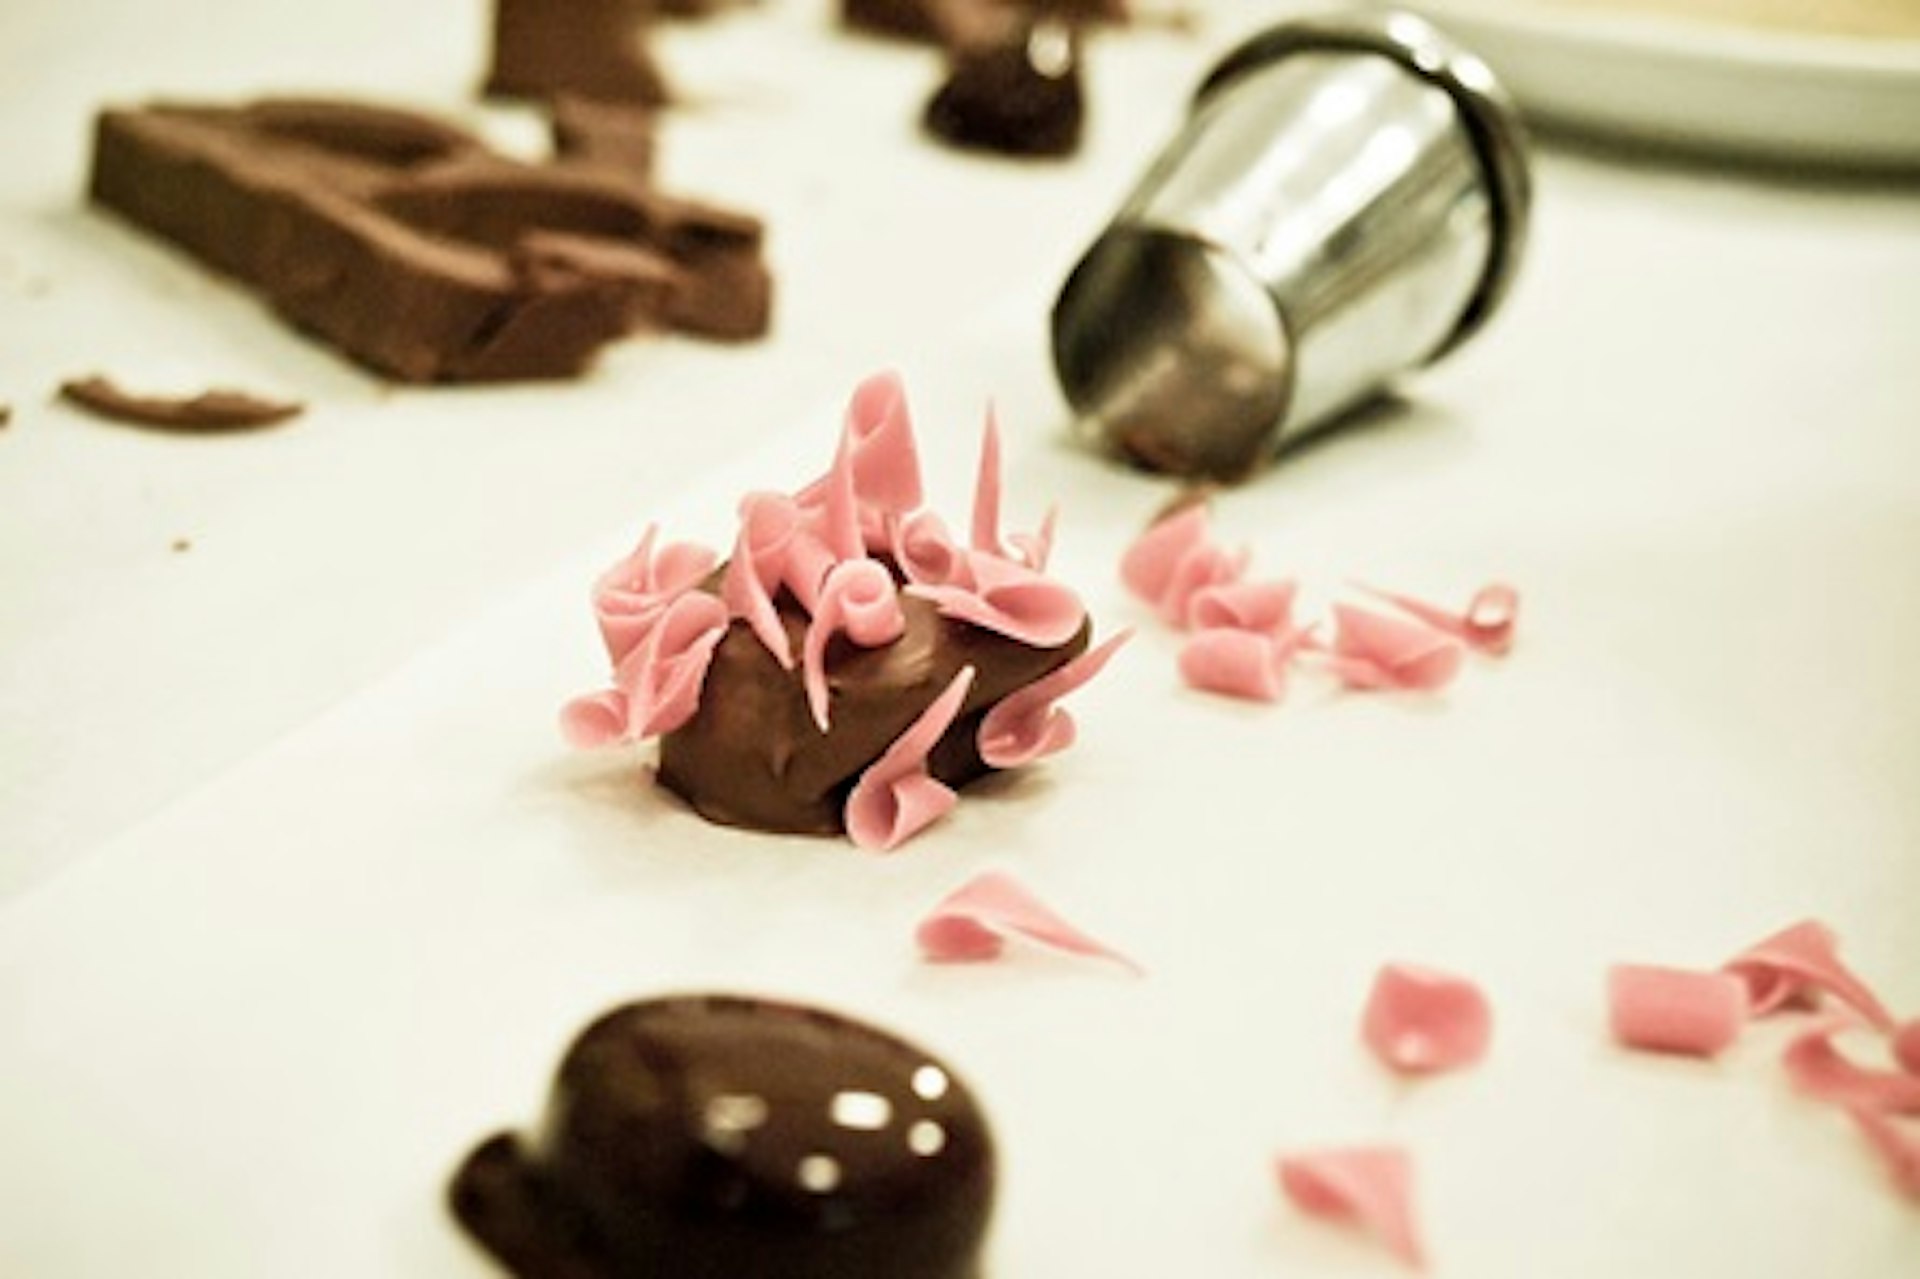 Luxury Chocolate Making Workshop Including Martini and Bubbly with My Chocolate 1